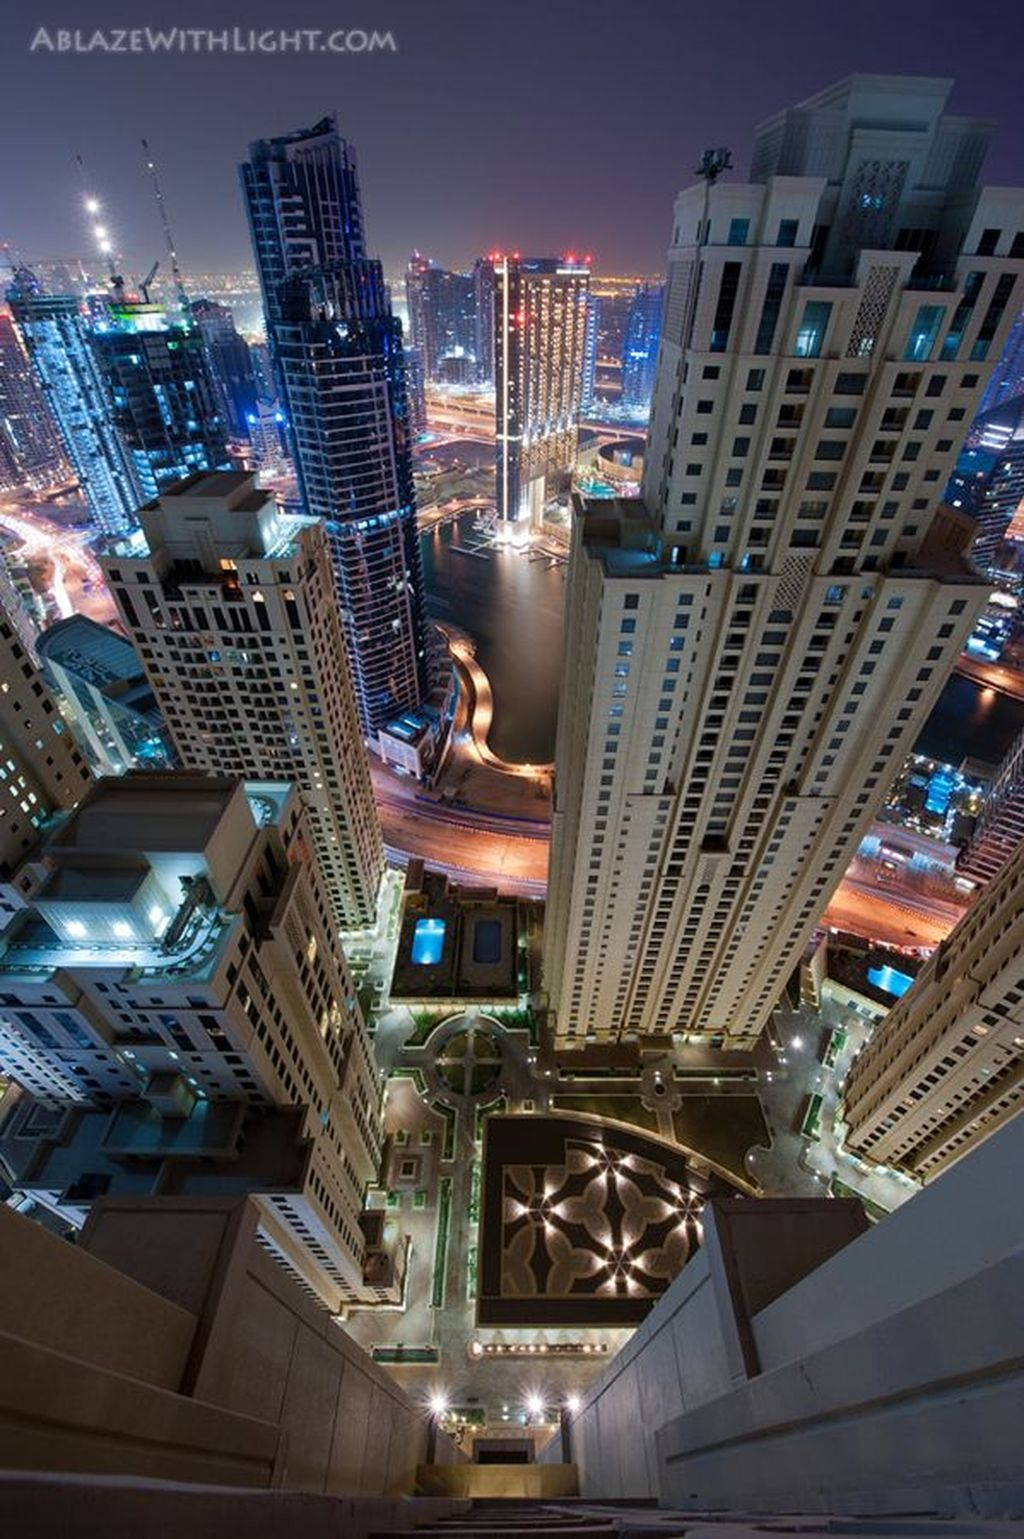 Awesome Photos Of Dubai To Make You Want To Visit It43